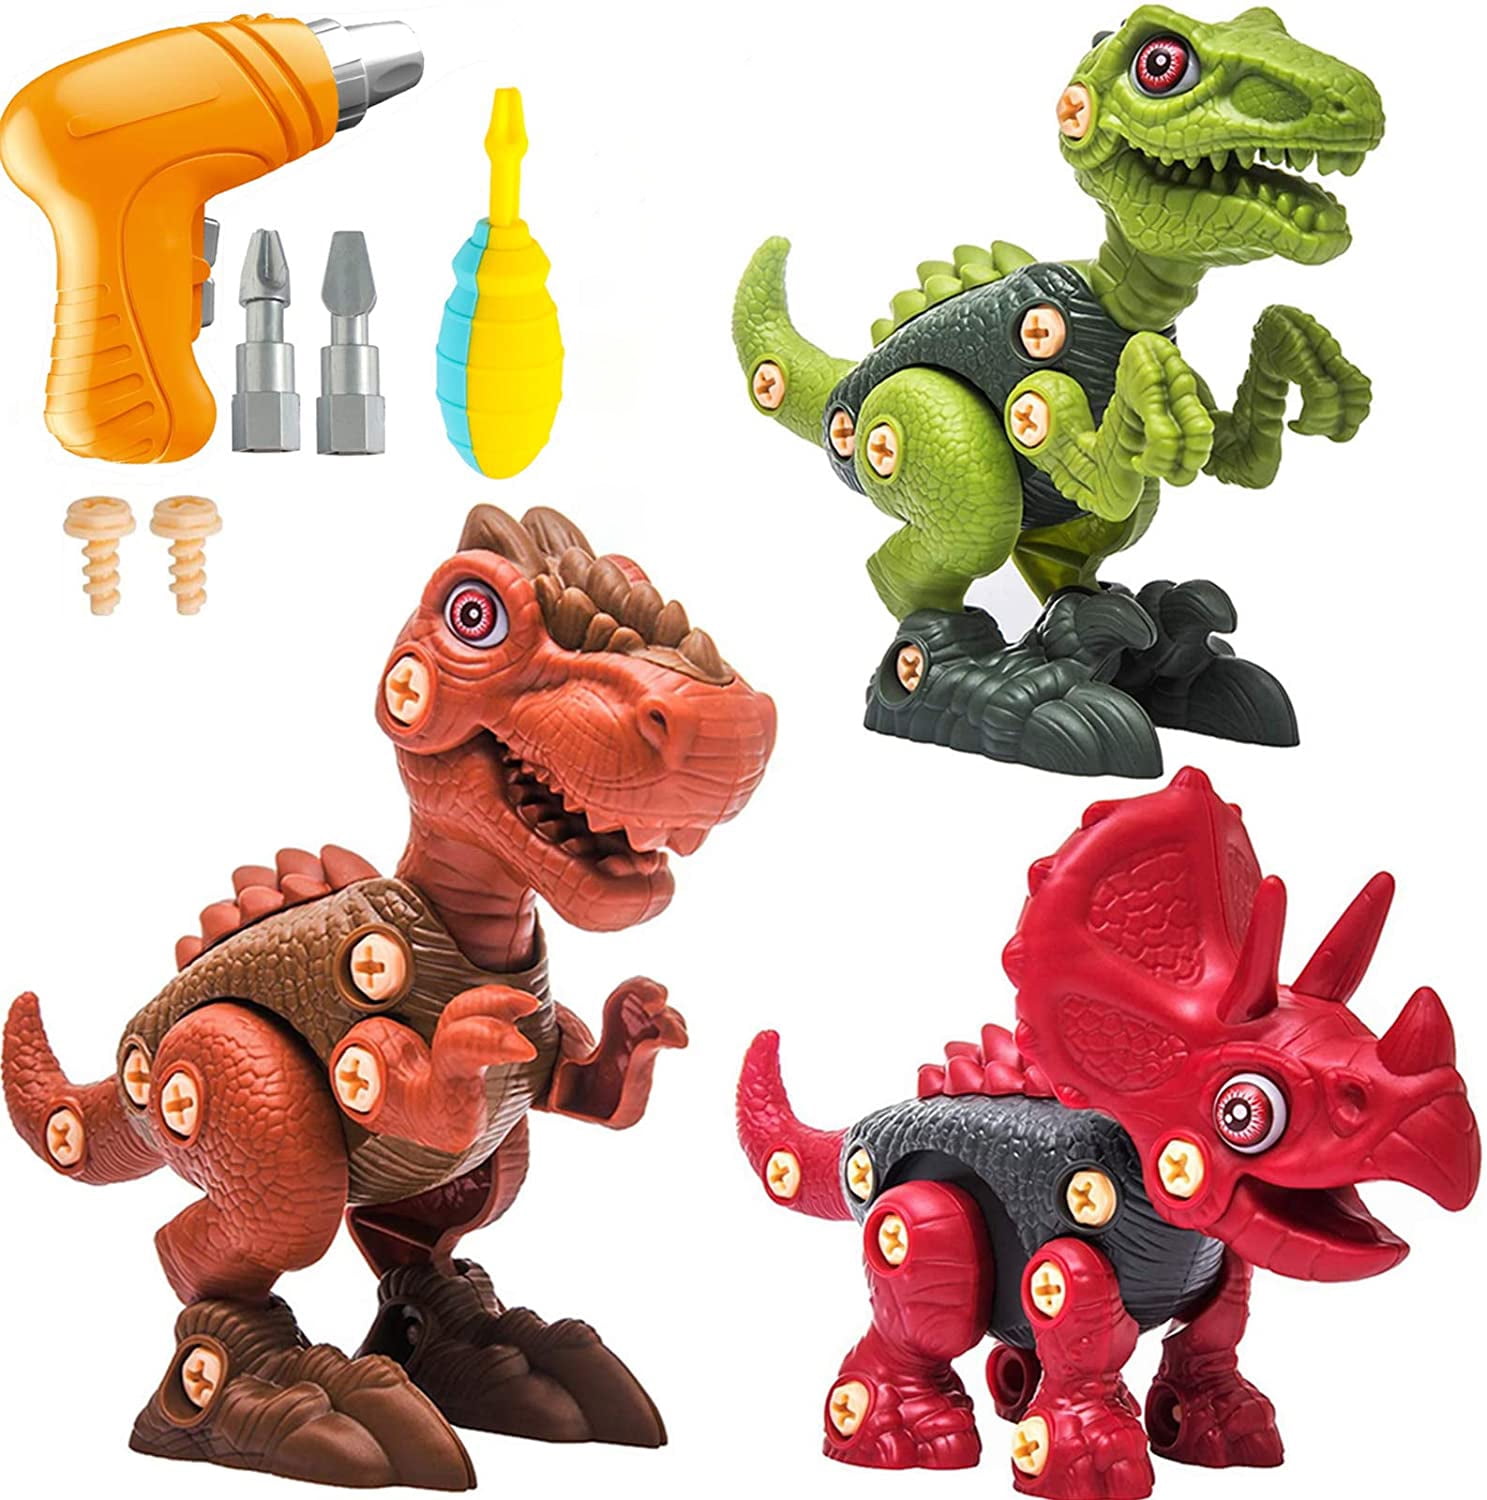 3 Pack STEM Construction Building Toy Set with Electric Drill Tools Take Apart Dinosaur Toys for Kids Educational Learning Games Play Kit Birthday Gifts for Boys Age 3 4 5 6 7